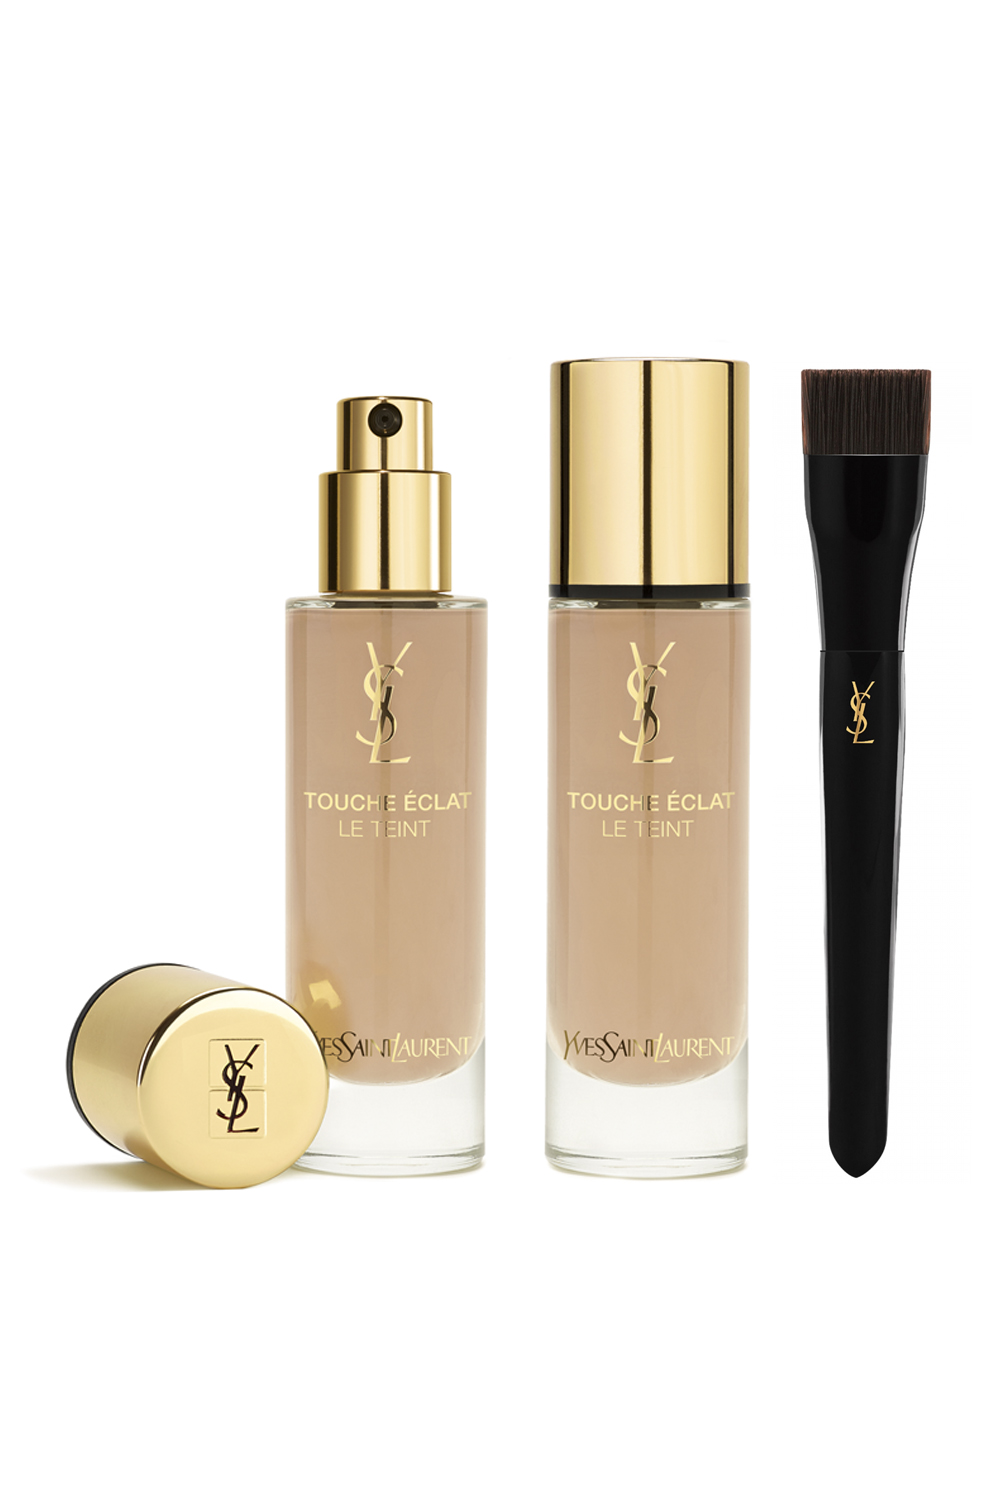 BASE PERFECTOR YSL Touche Éclat Le Teint, $98, and Y Brush, $89.